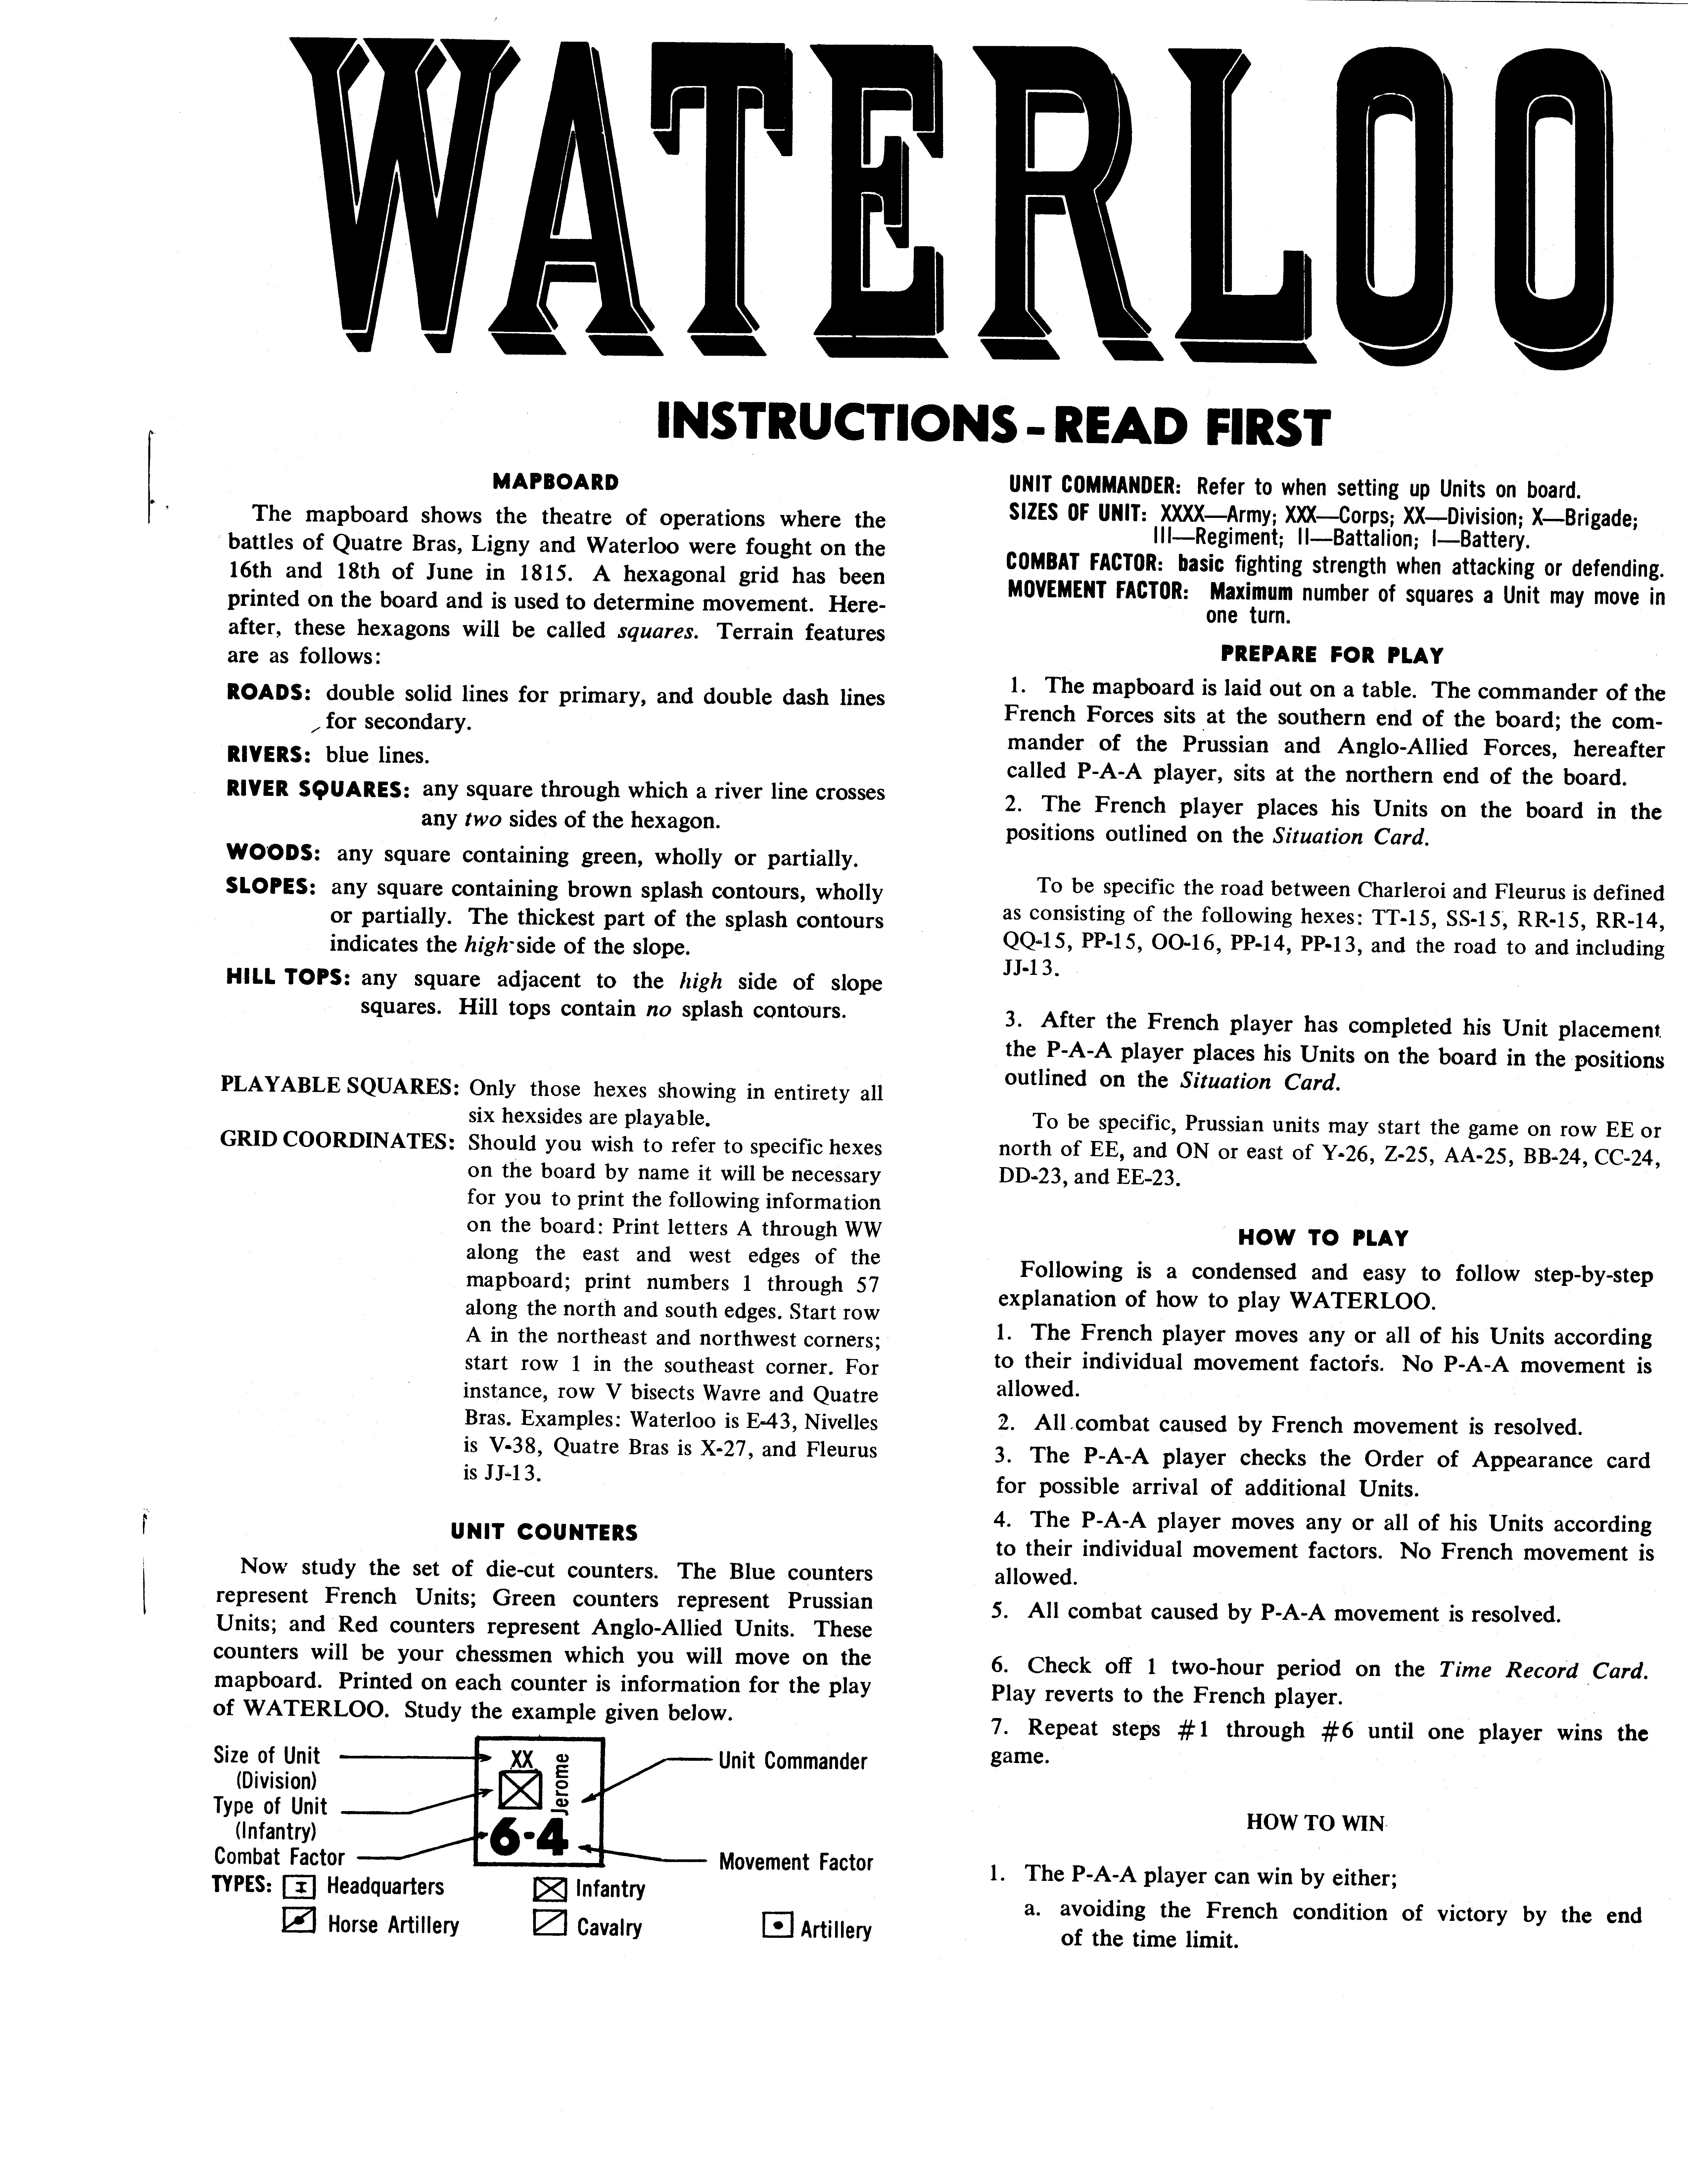 Waterloo Rules Page 1